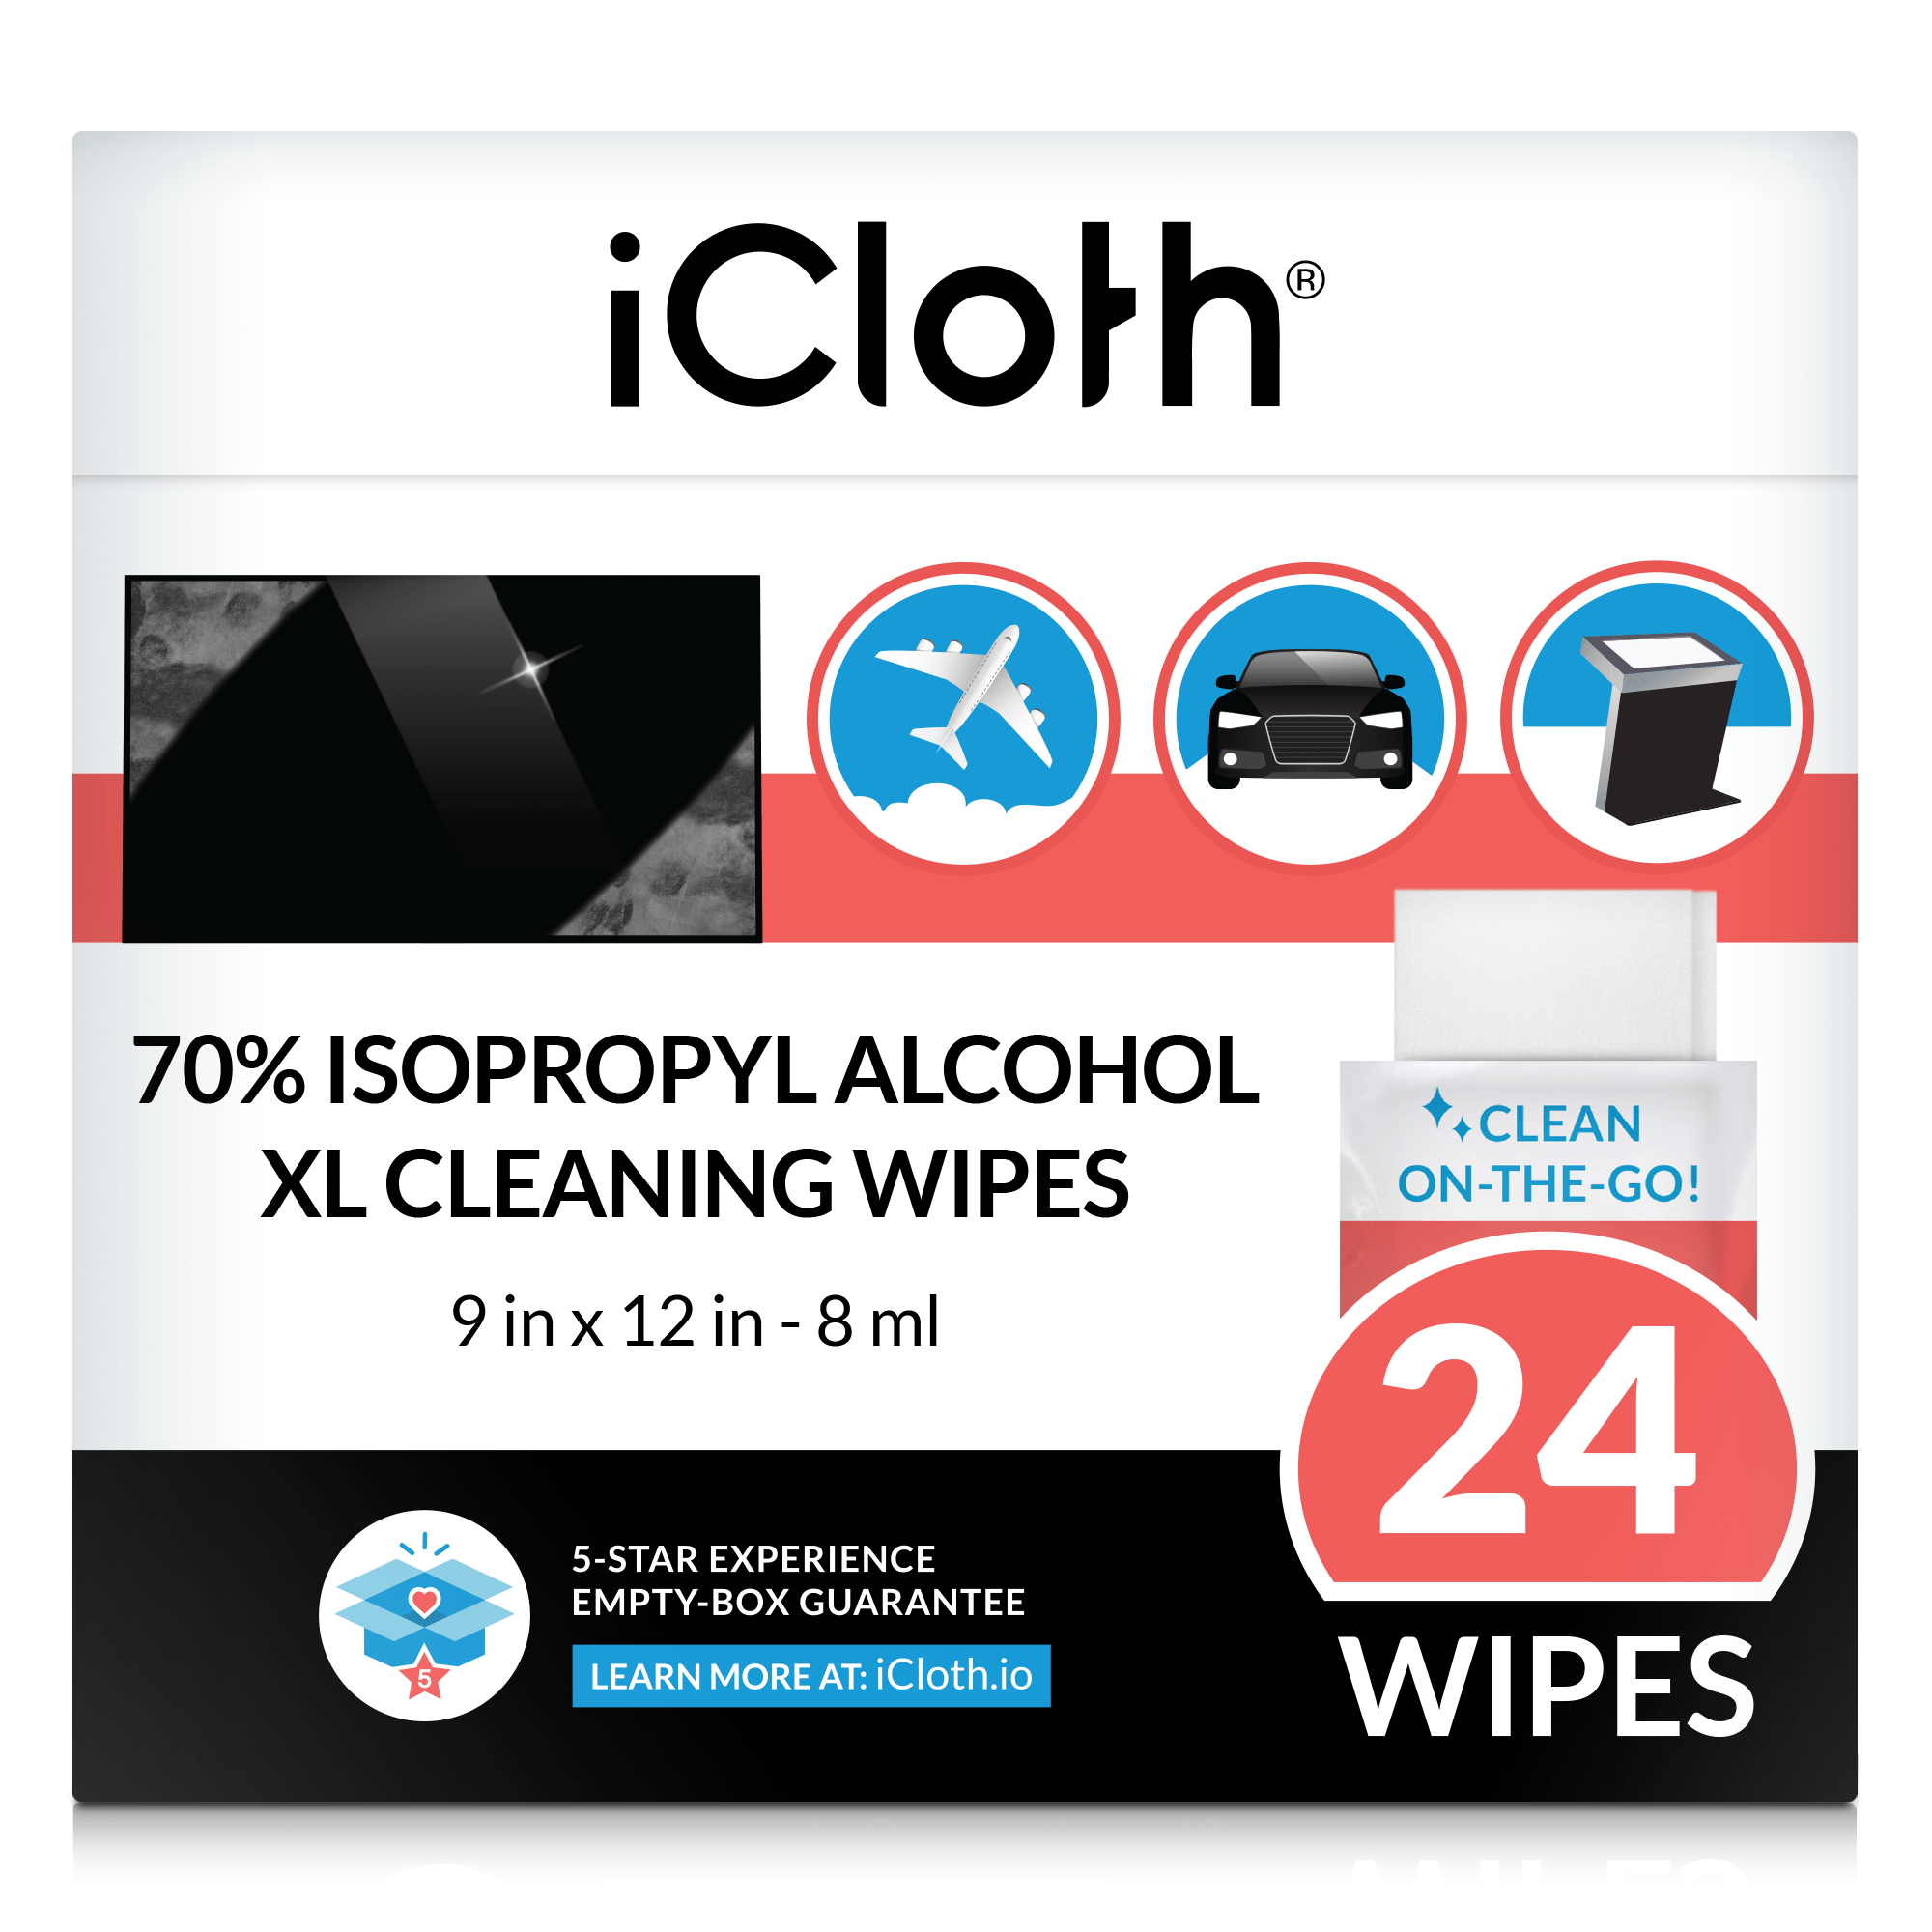 24 wipes of iCloth 70% Isopropyl Alcohol XL Cleaning Wipes